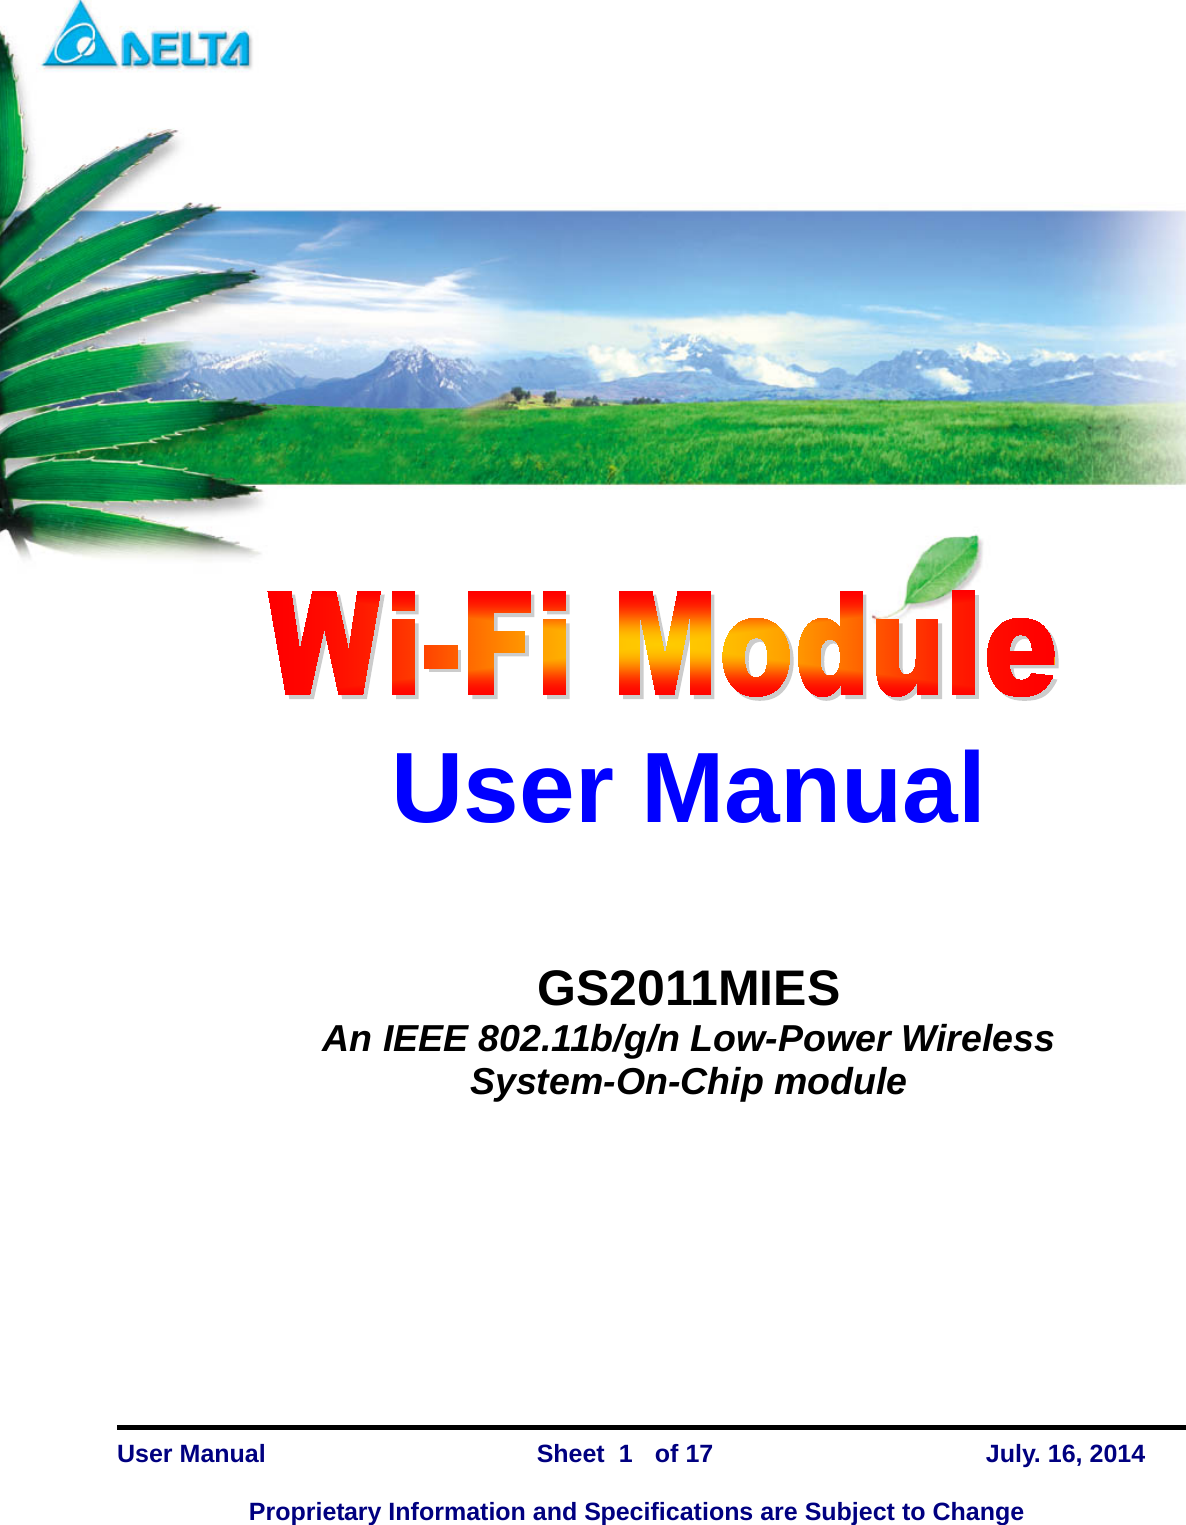     GS2011MIES   User Manual   GS2011MIES An IEEE 802.11b/g/n Low-Power Wireless System-On-Chip module   User Manual                Sheet    of 17      July. 16, 2014  Proprietary Information and Specifications are Subject to Change 1 